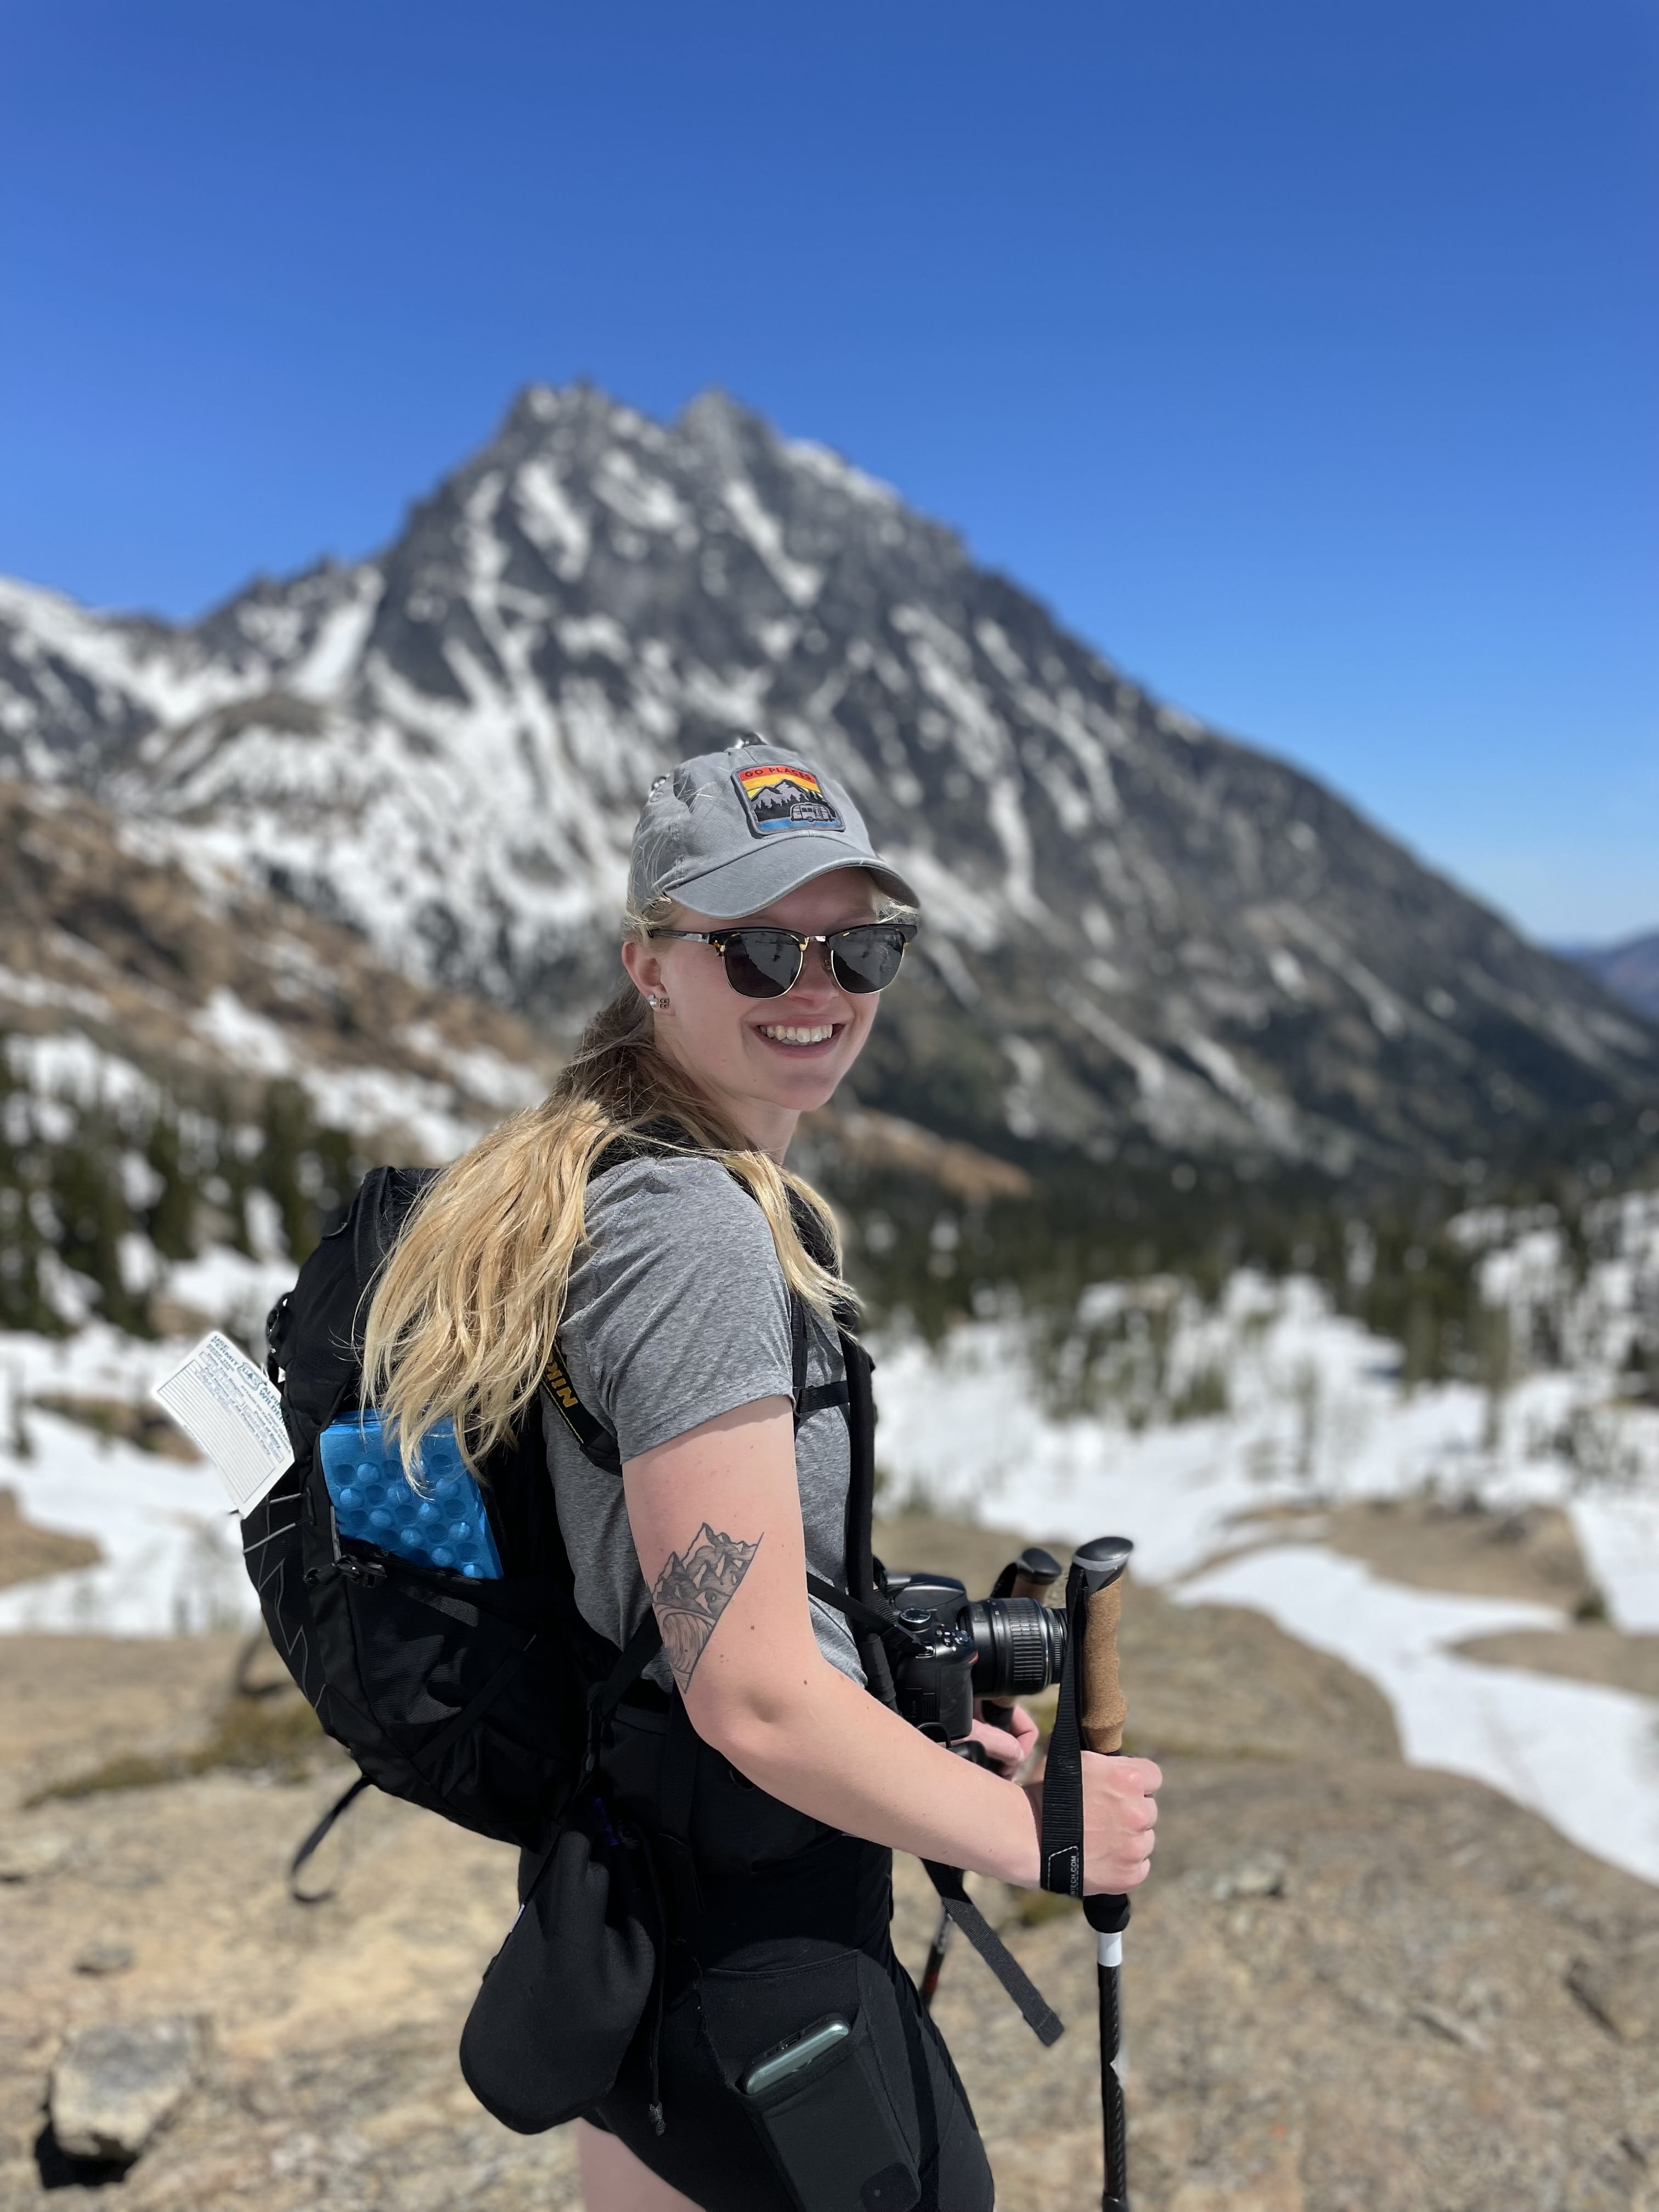 Kassidy Olson, guest author at The Backpacking Site